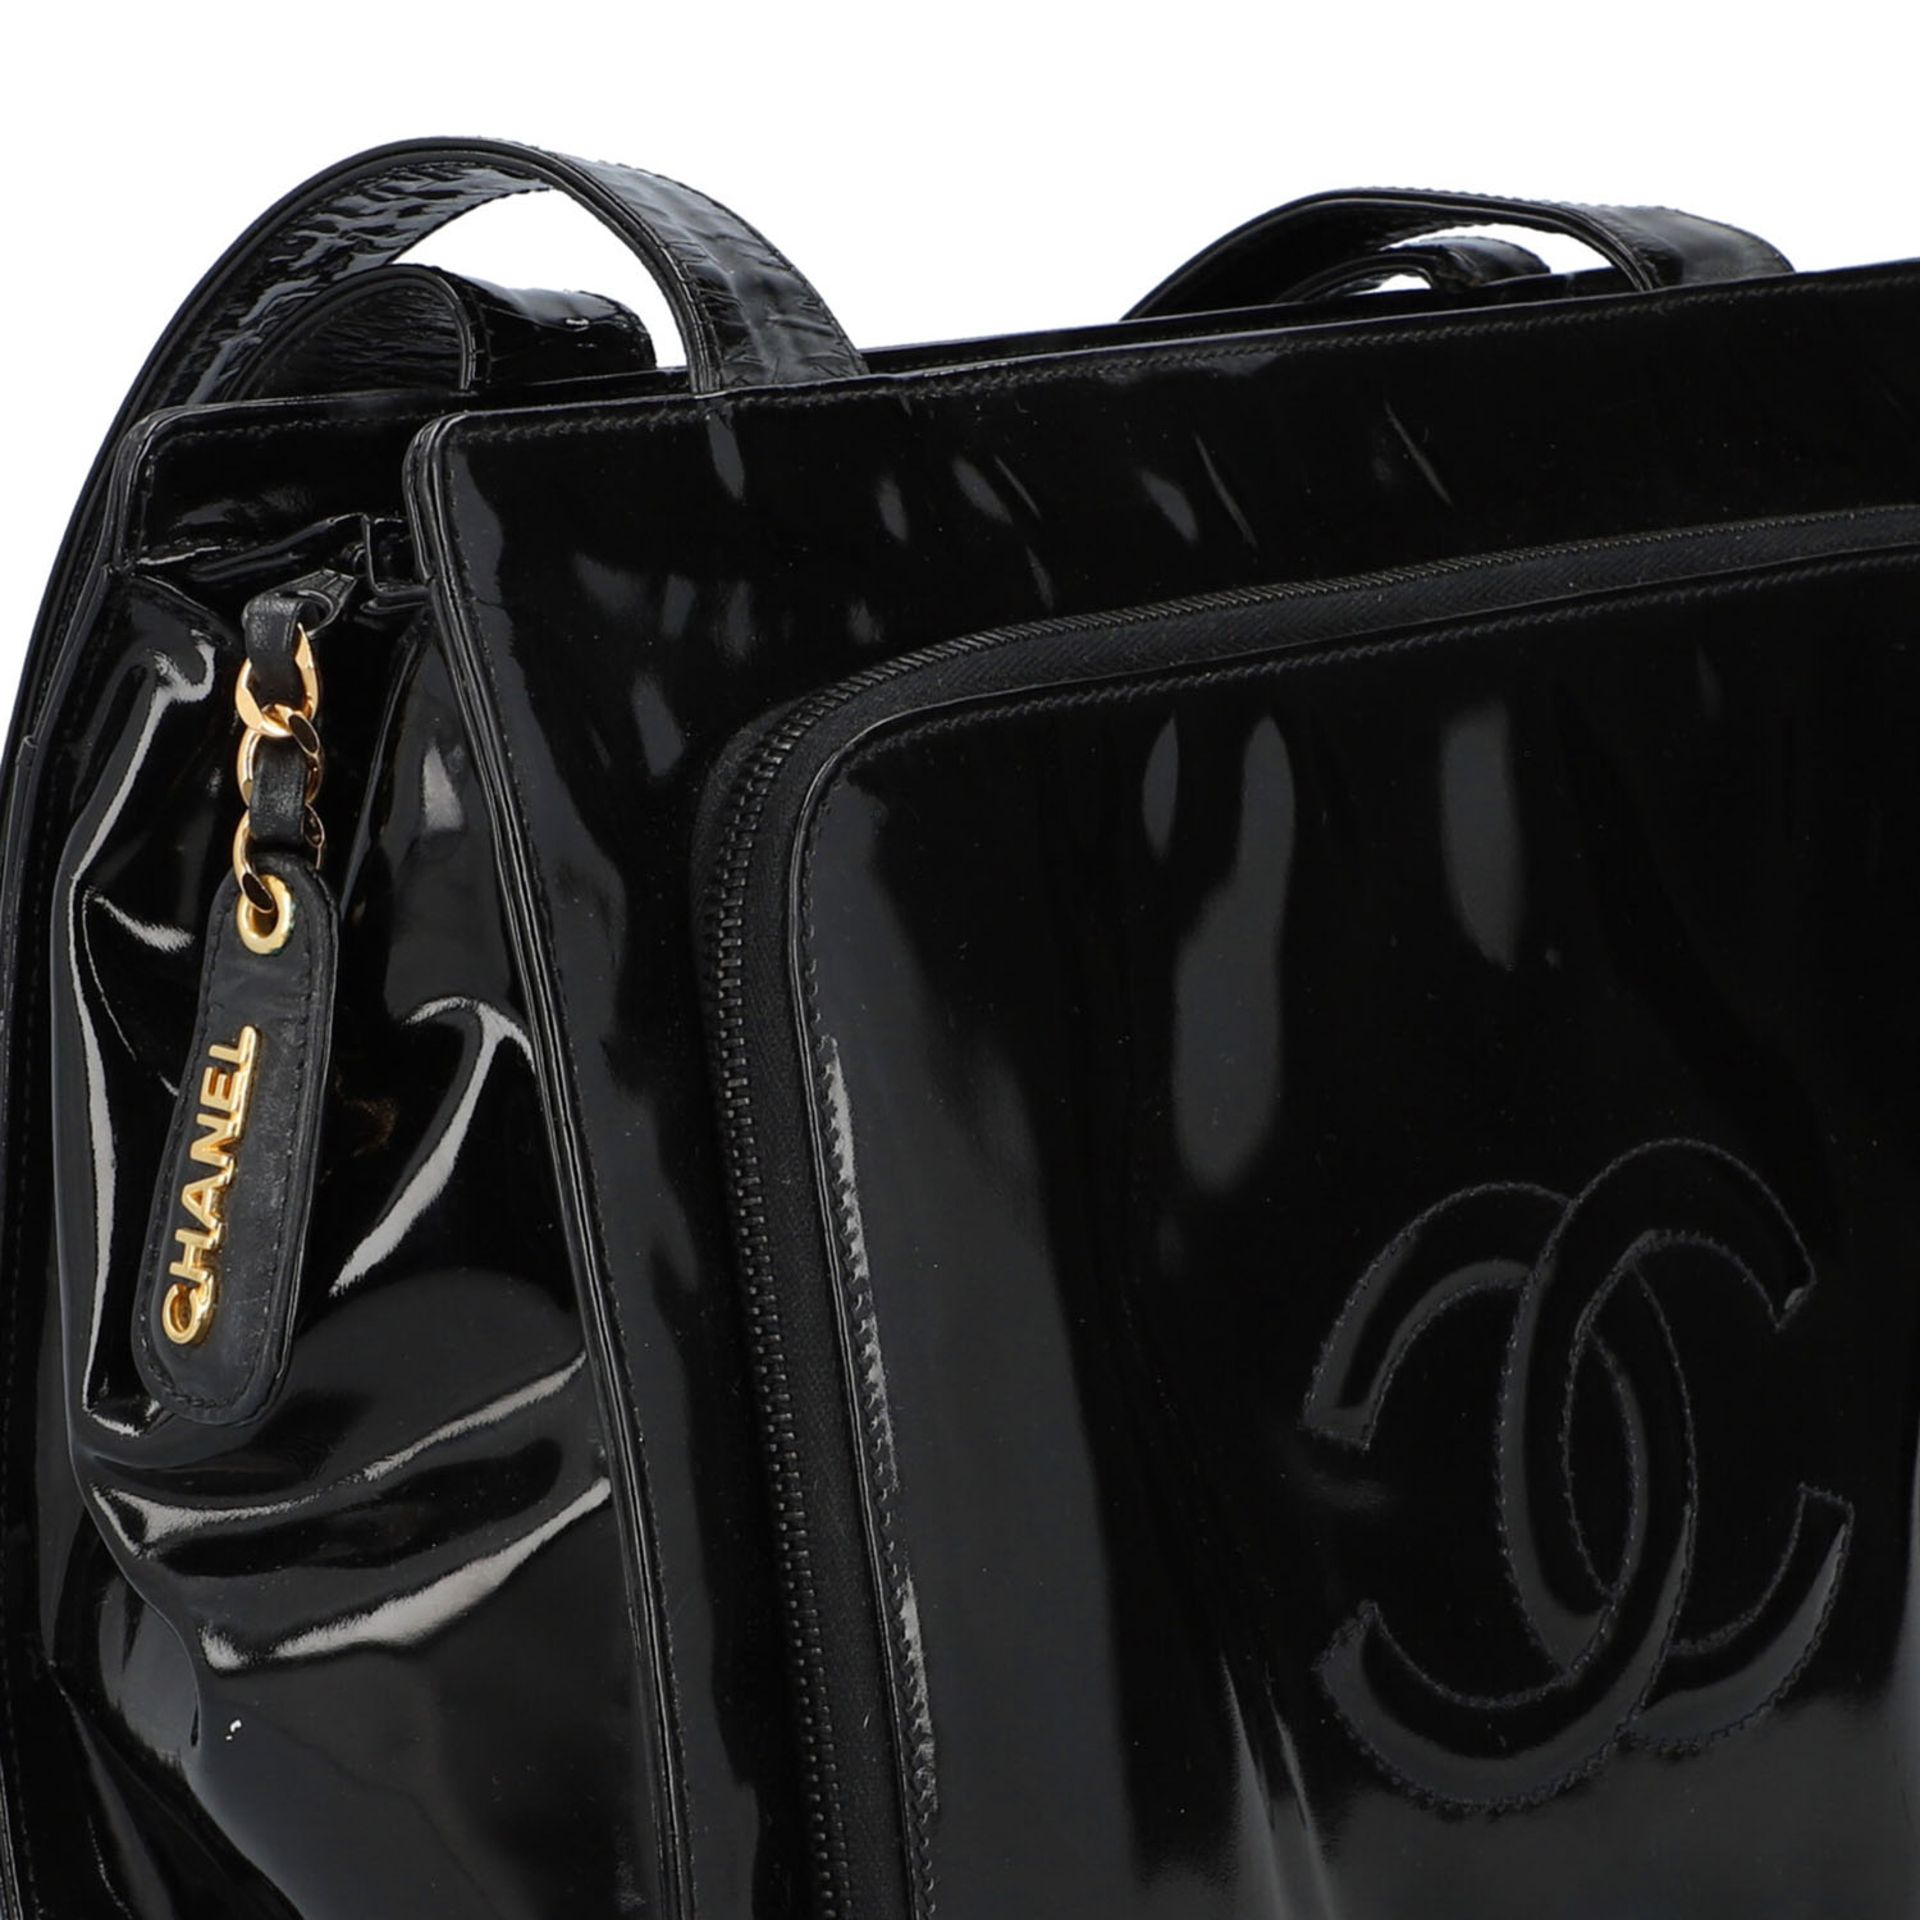 CHANEL VINTAGE Schultertasche, Koll. 1996/1997. - Image 8 of 8